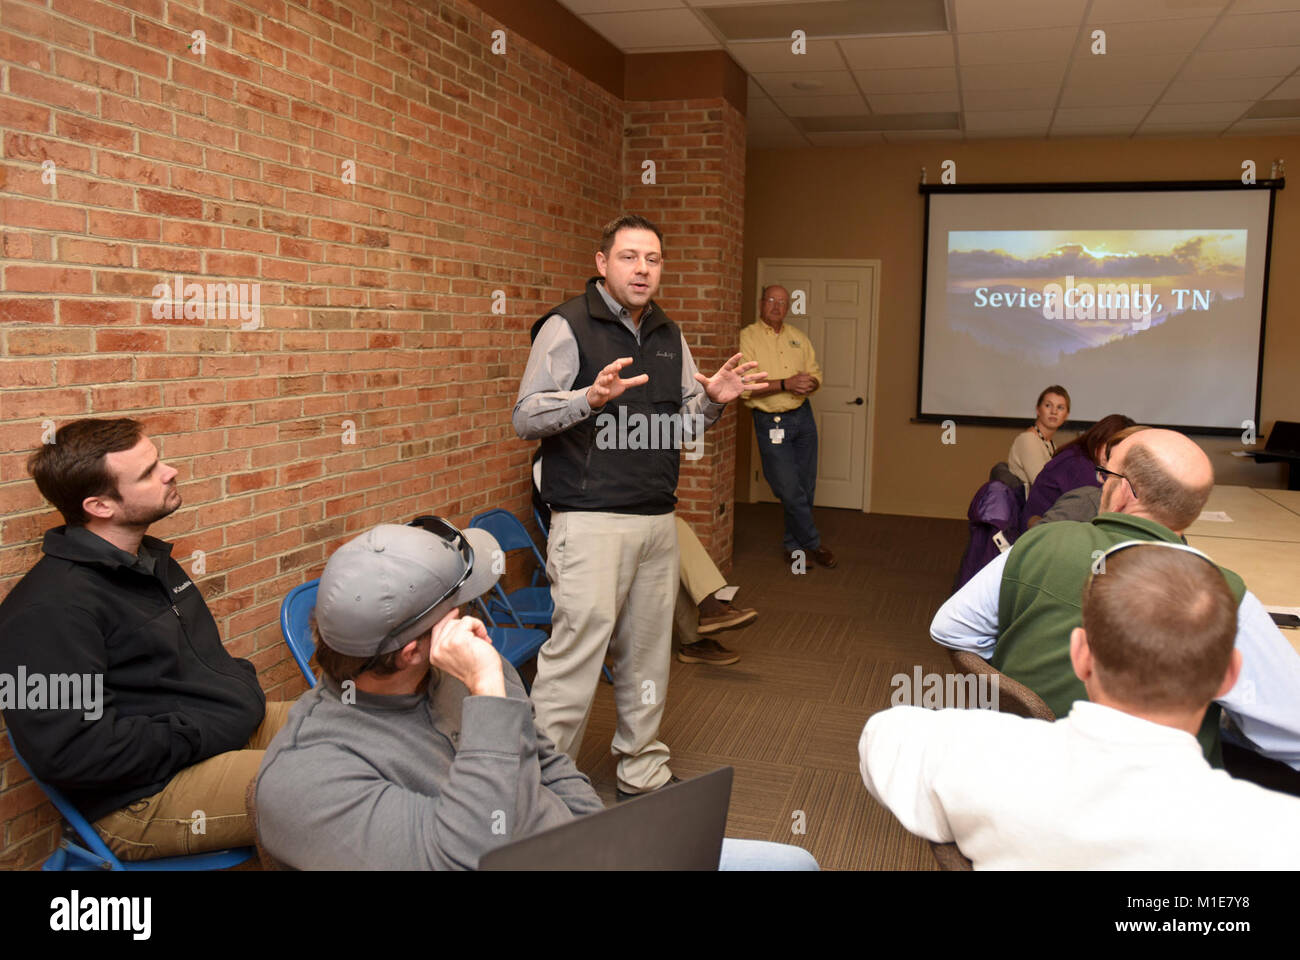 Bryan McCarter, vice mayor of Sevierville, Tenn., welcomes members of Tennessee Silver Jackets to the city's emergency management center Jan. 25, 2018. The Silver Jackets team received a briefing on the wildfires that moved through Sevier County and city of Gatlinburg in November 2016. Silver Jackets is an innovative partnership where local, state and federal agencies facilitate flood risk reduction, coordinates programs, promotes cohesive solutions, synchronizes plans and policies, and ultimately provides integrated solutions. (USACE Stock Photo